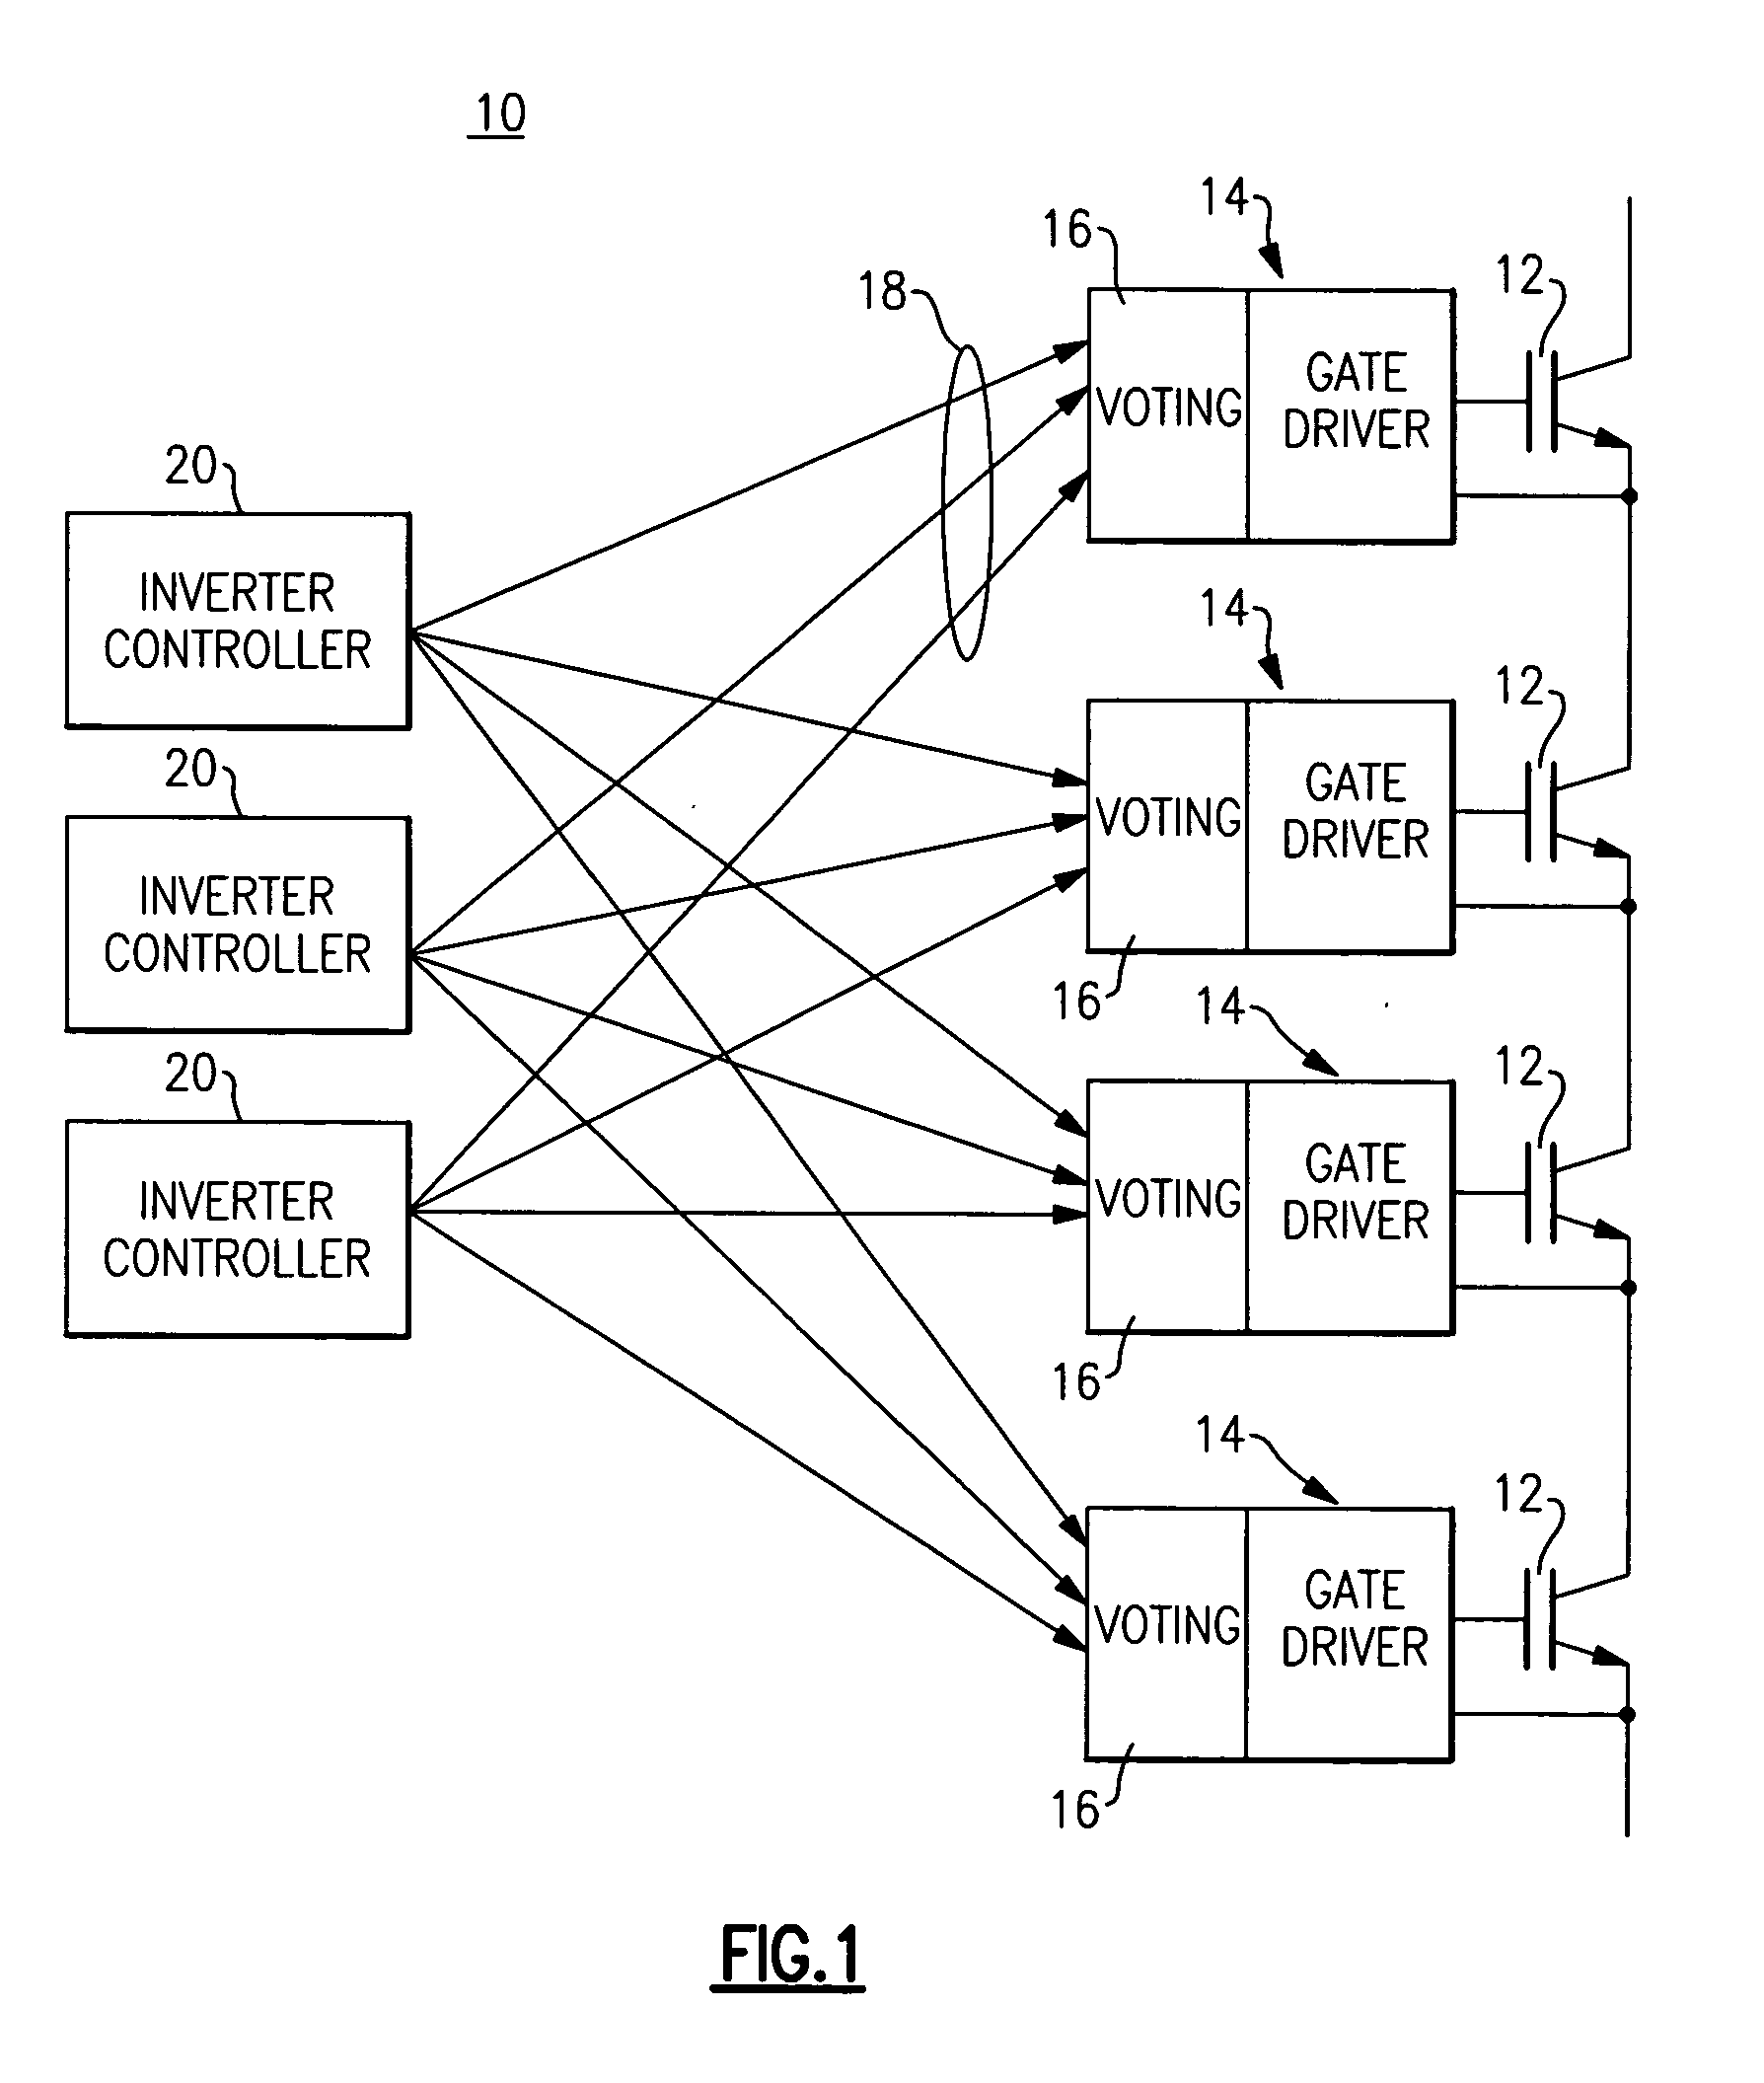 Circuit and topology for very high reliability power electronics system